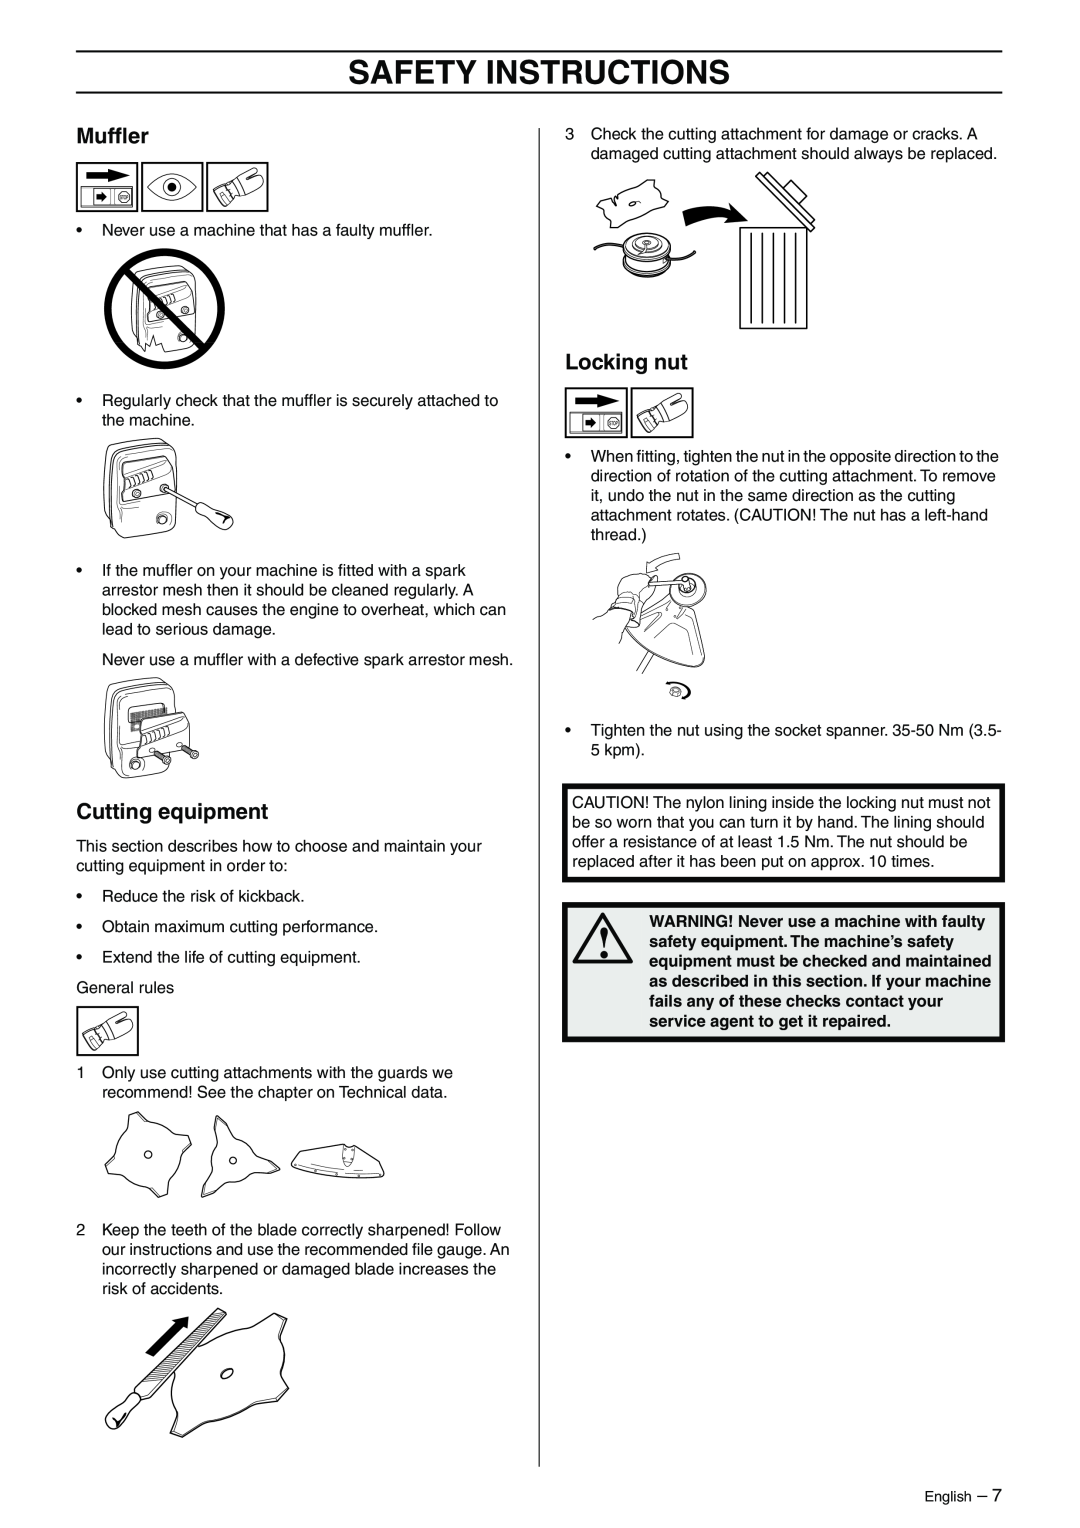 Husqvarna 325RJ manual Safety Instructions, WARNING! Never use a machine with faulty 